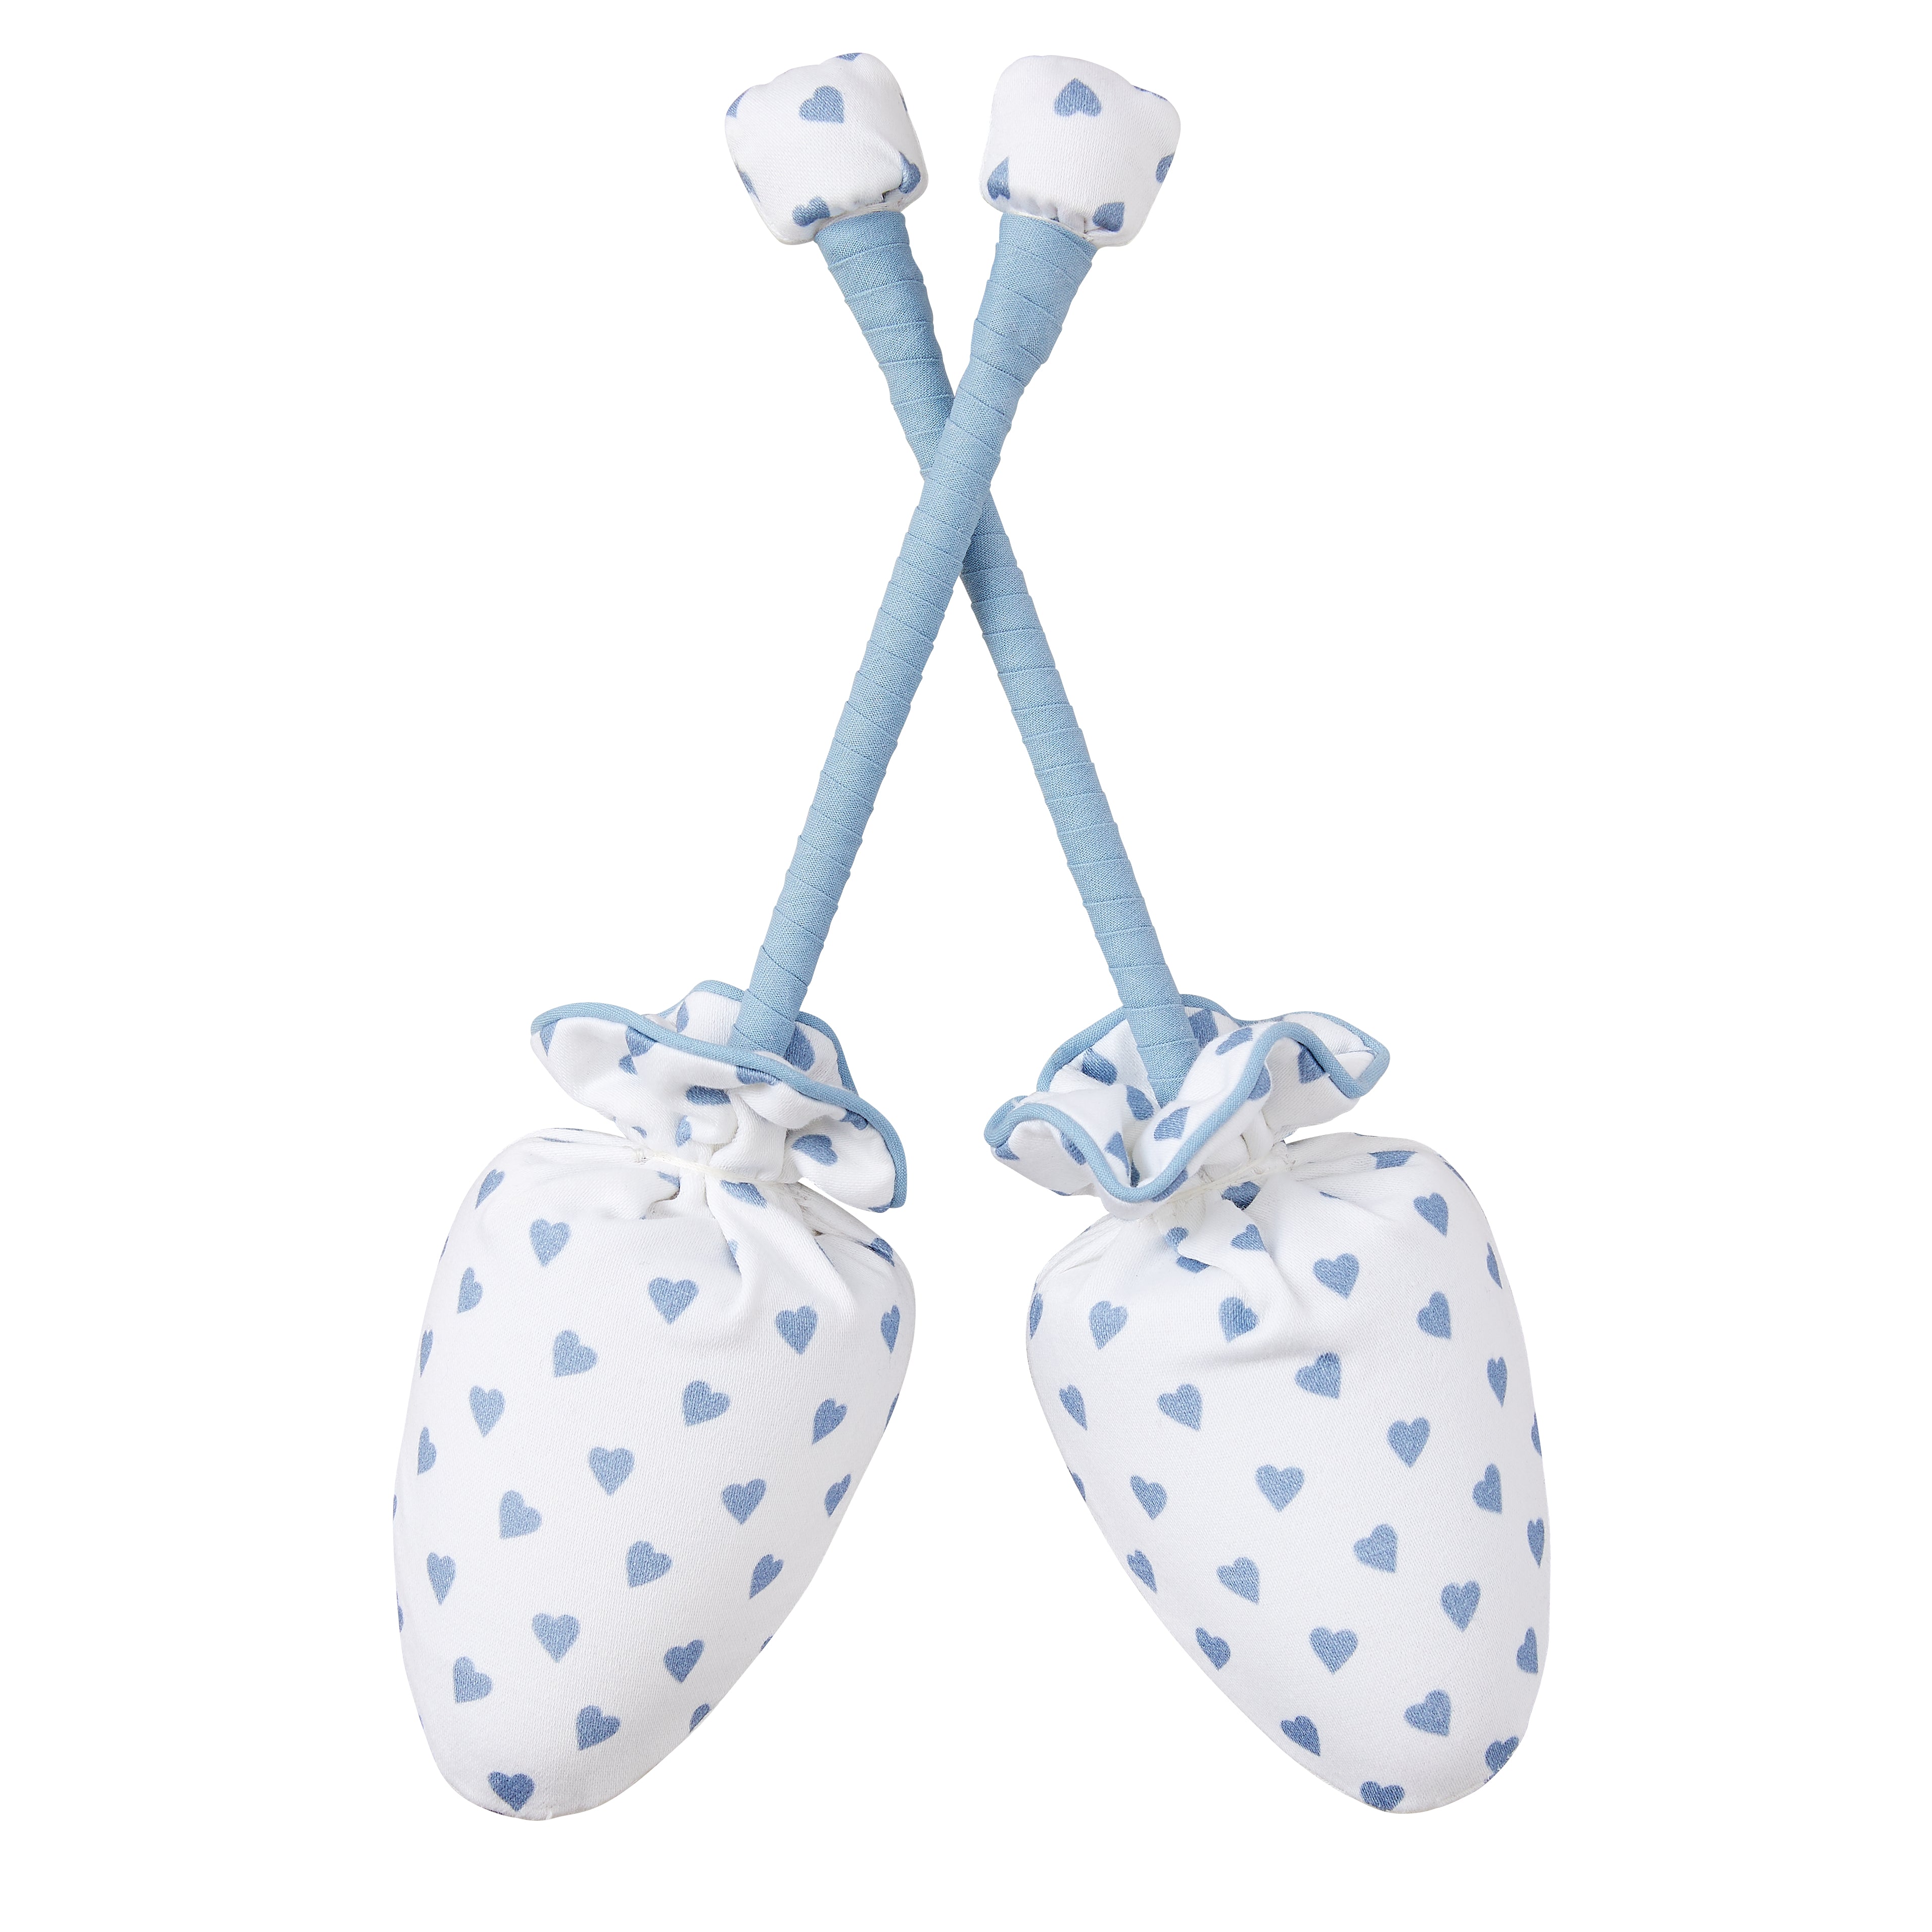 Pair of Shoe Trees - Heart Blue